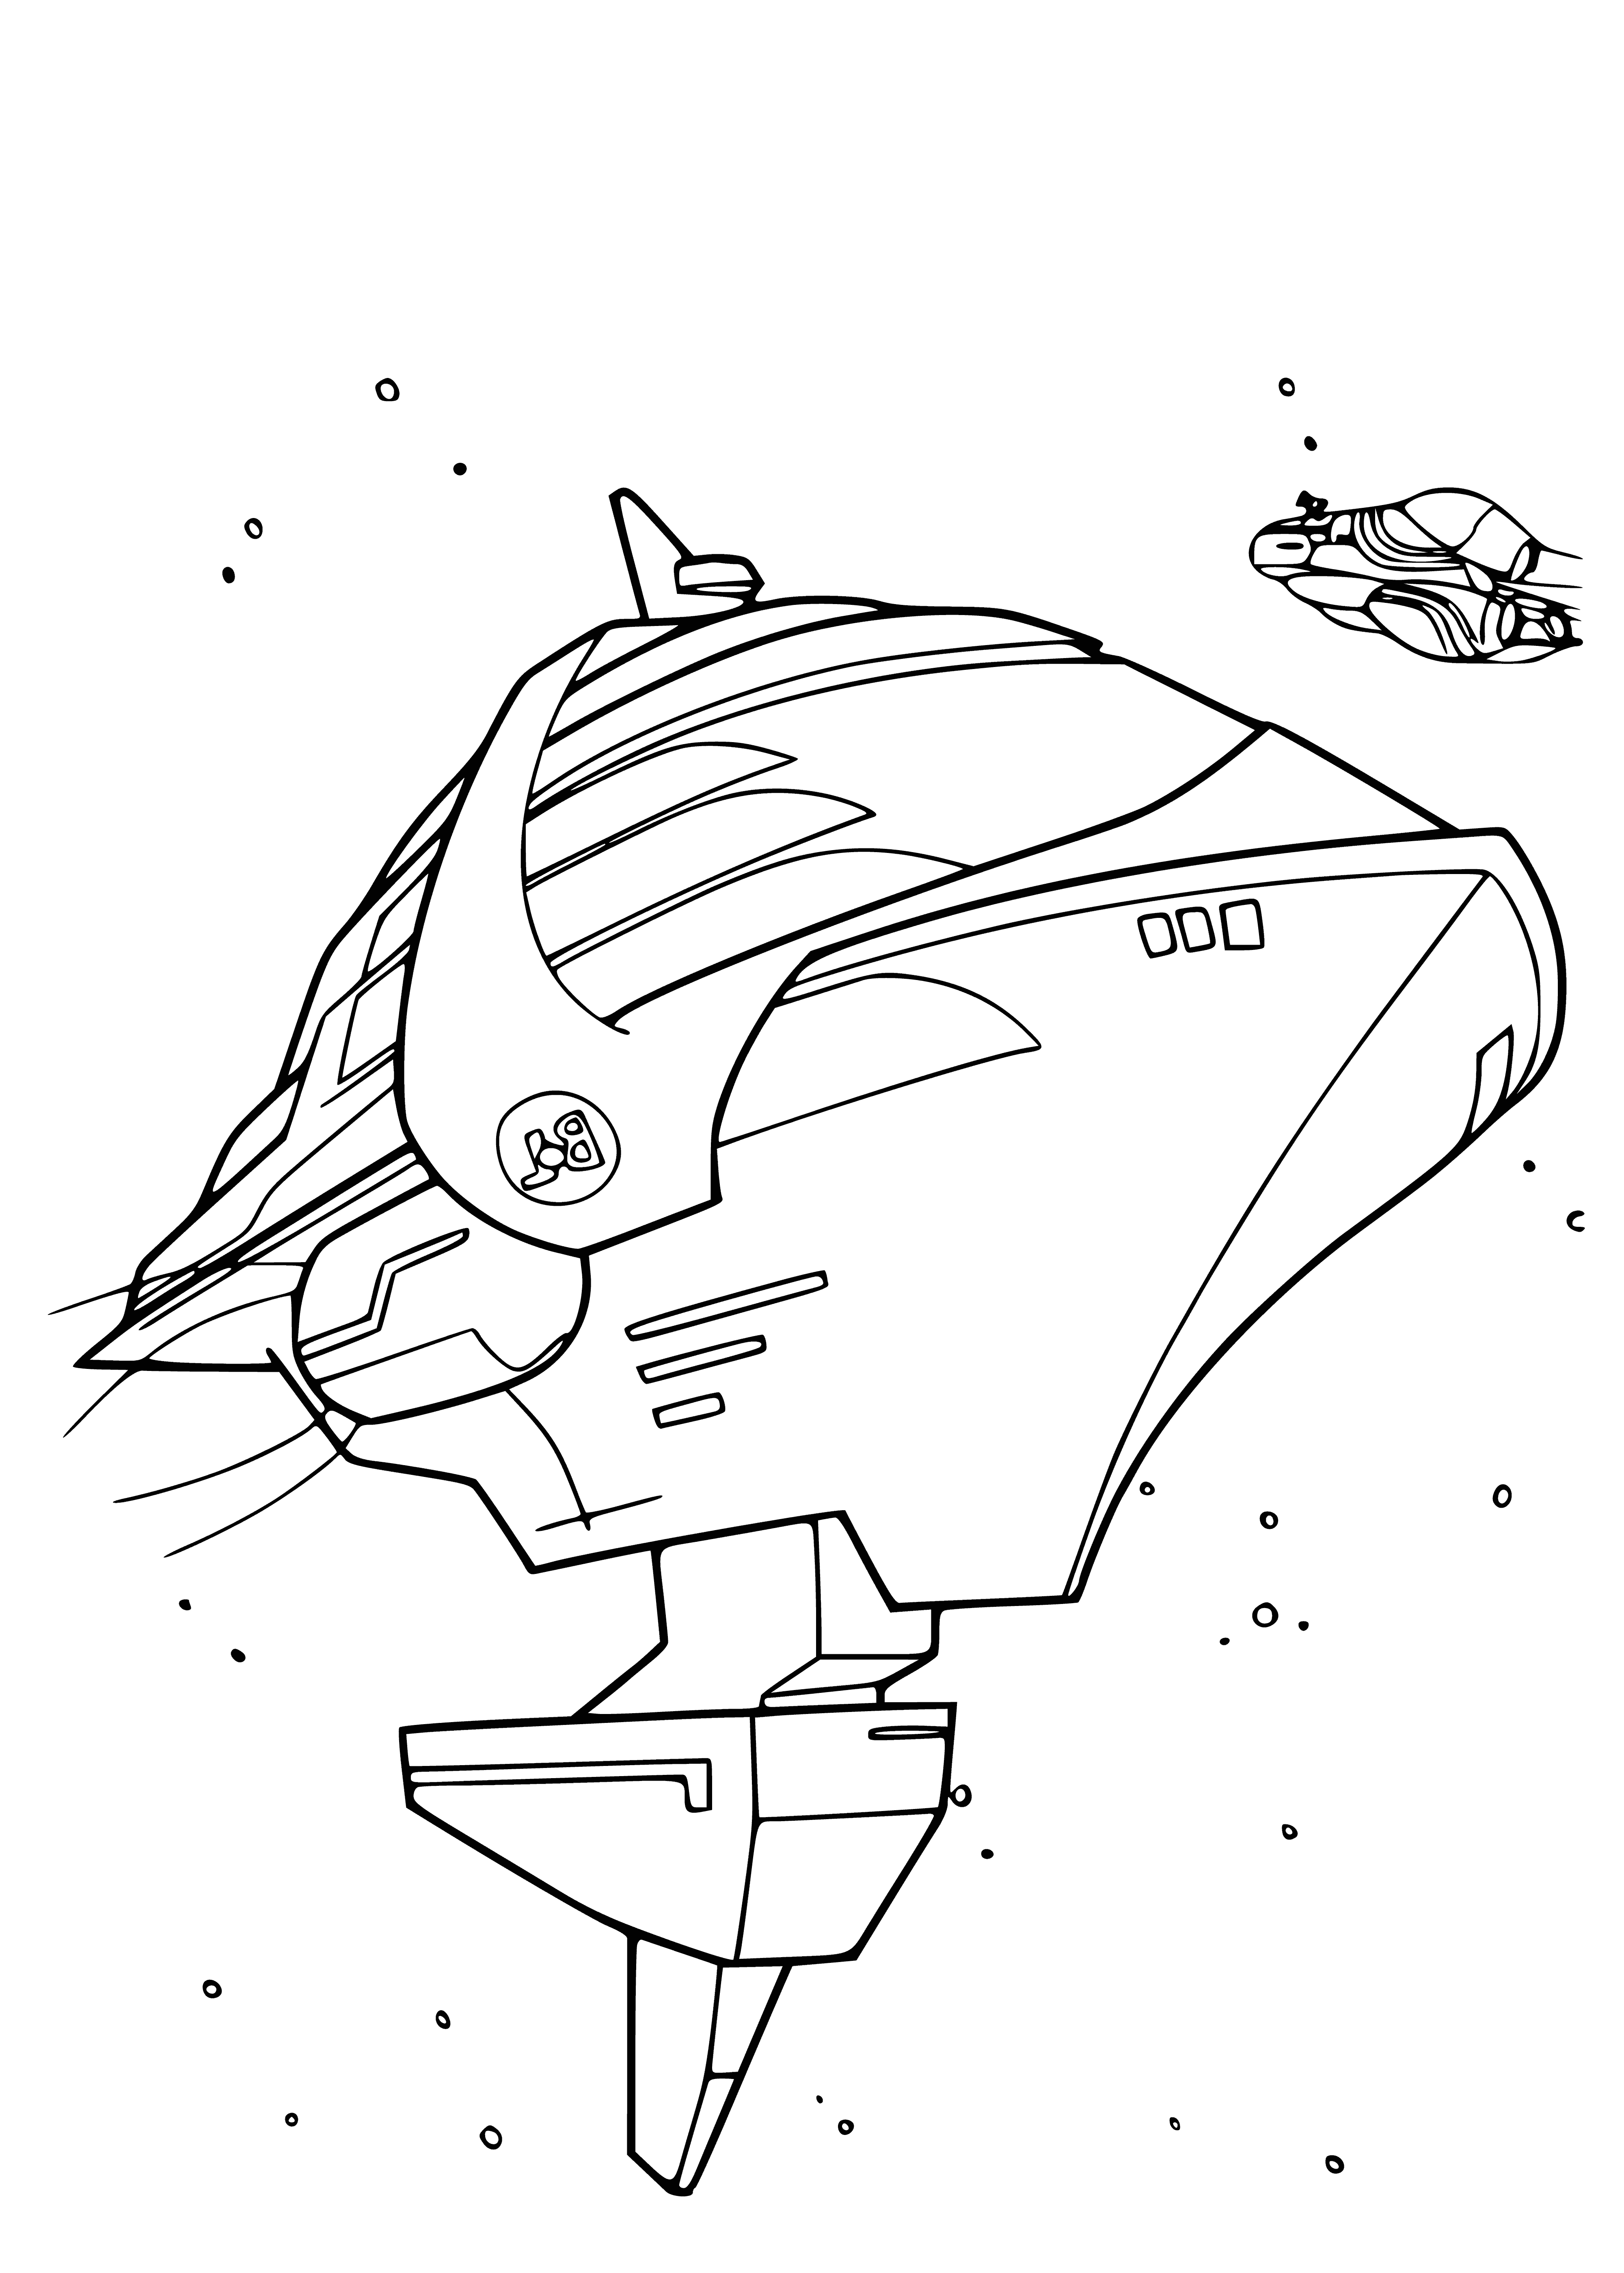 coloring page: Spacecraft w/big cockpit and engines, rectangular viewport, small wings, large back door, two engines.